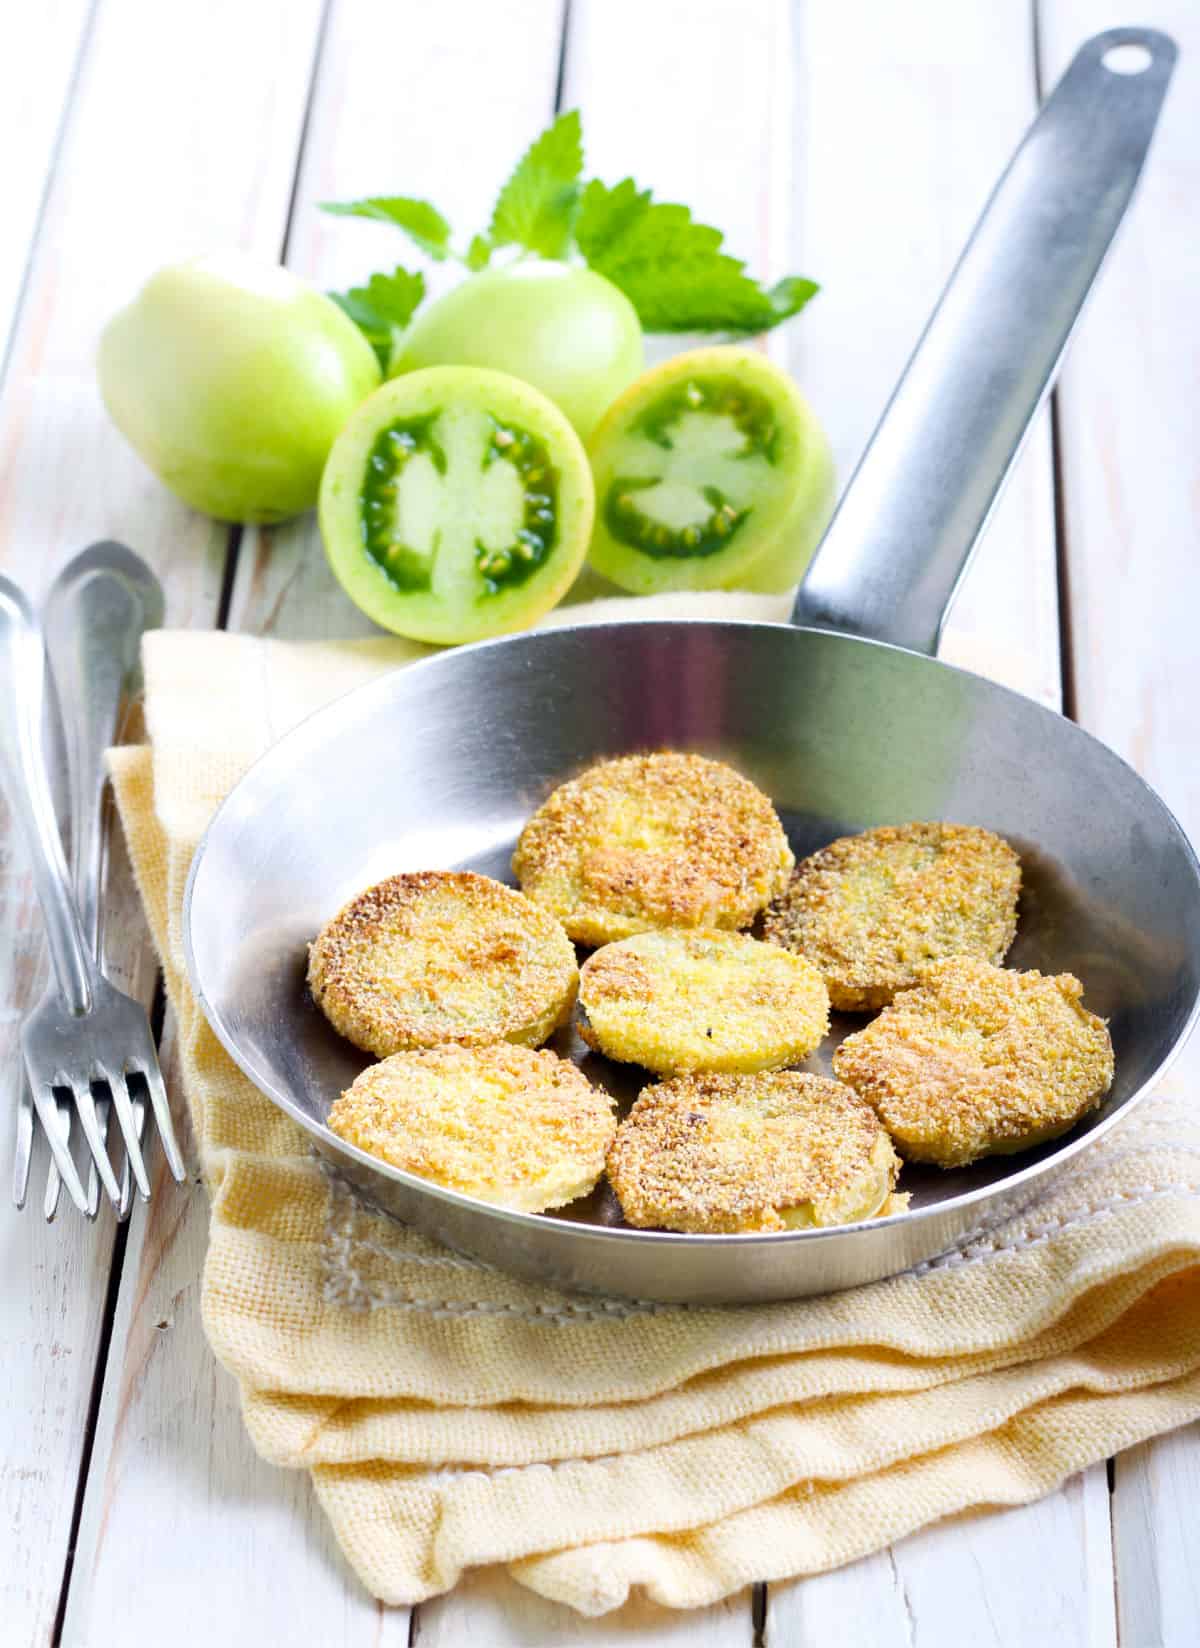 a frying pan full of fried green tomatoes with sliced green tomatoes beyond